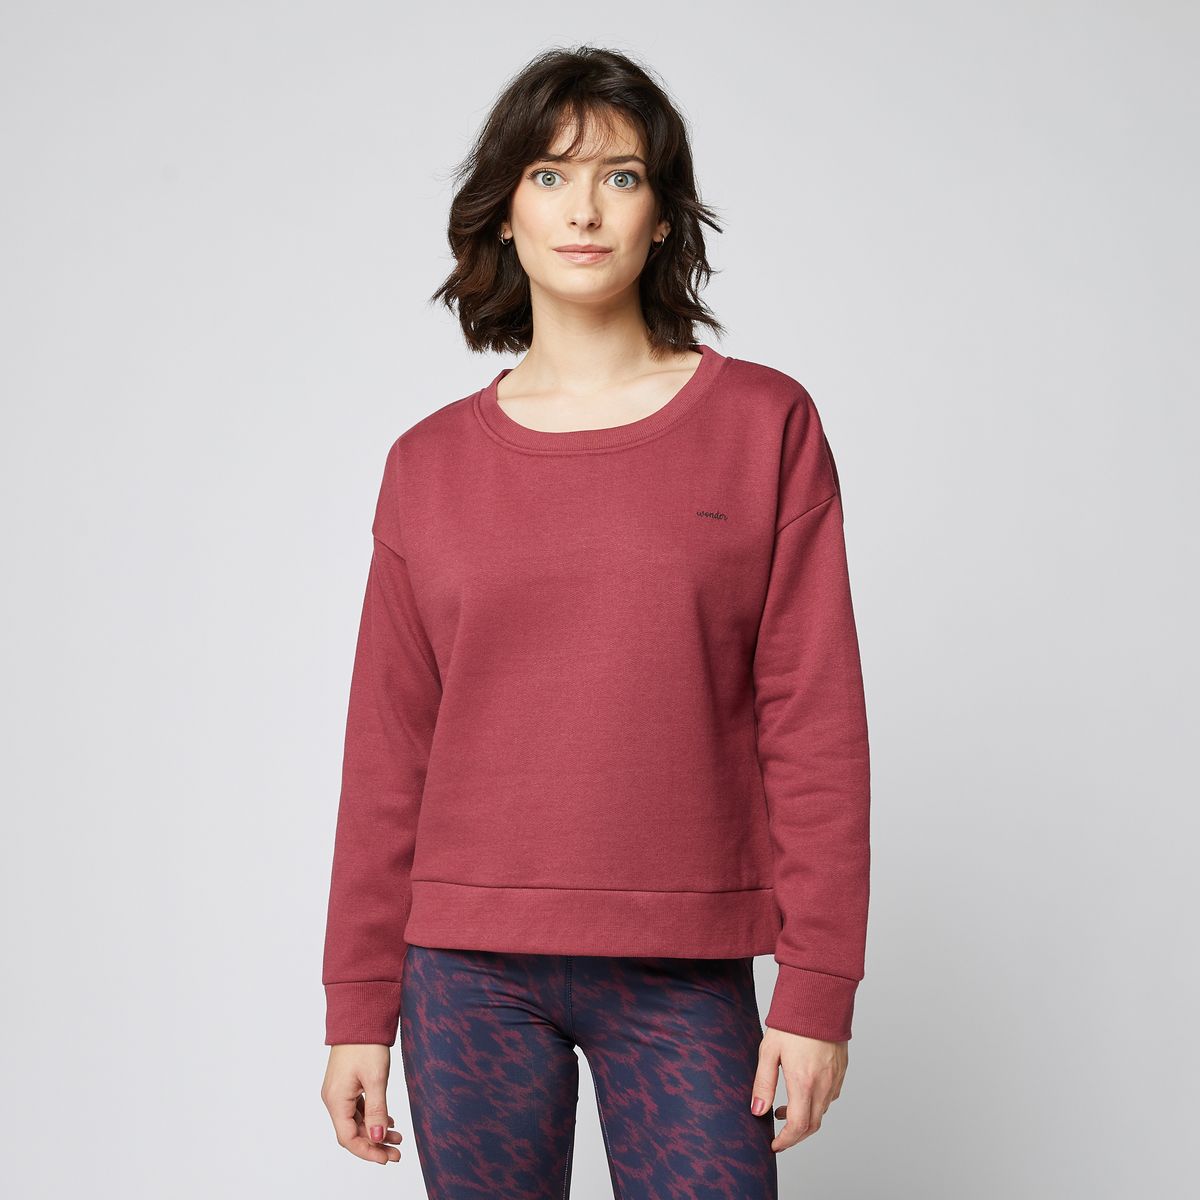 IN EXTENSO SPORT Sweat large sport violet clair femme